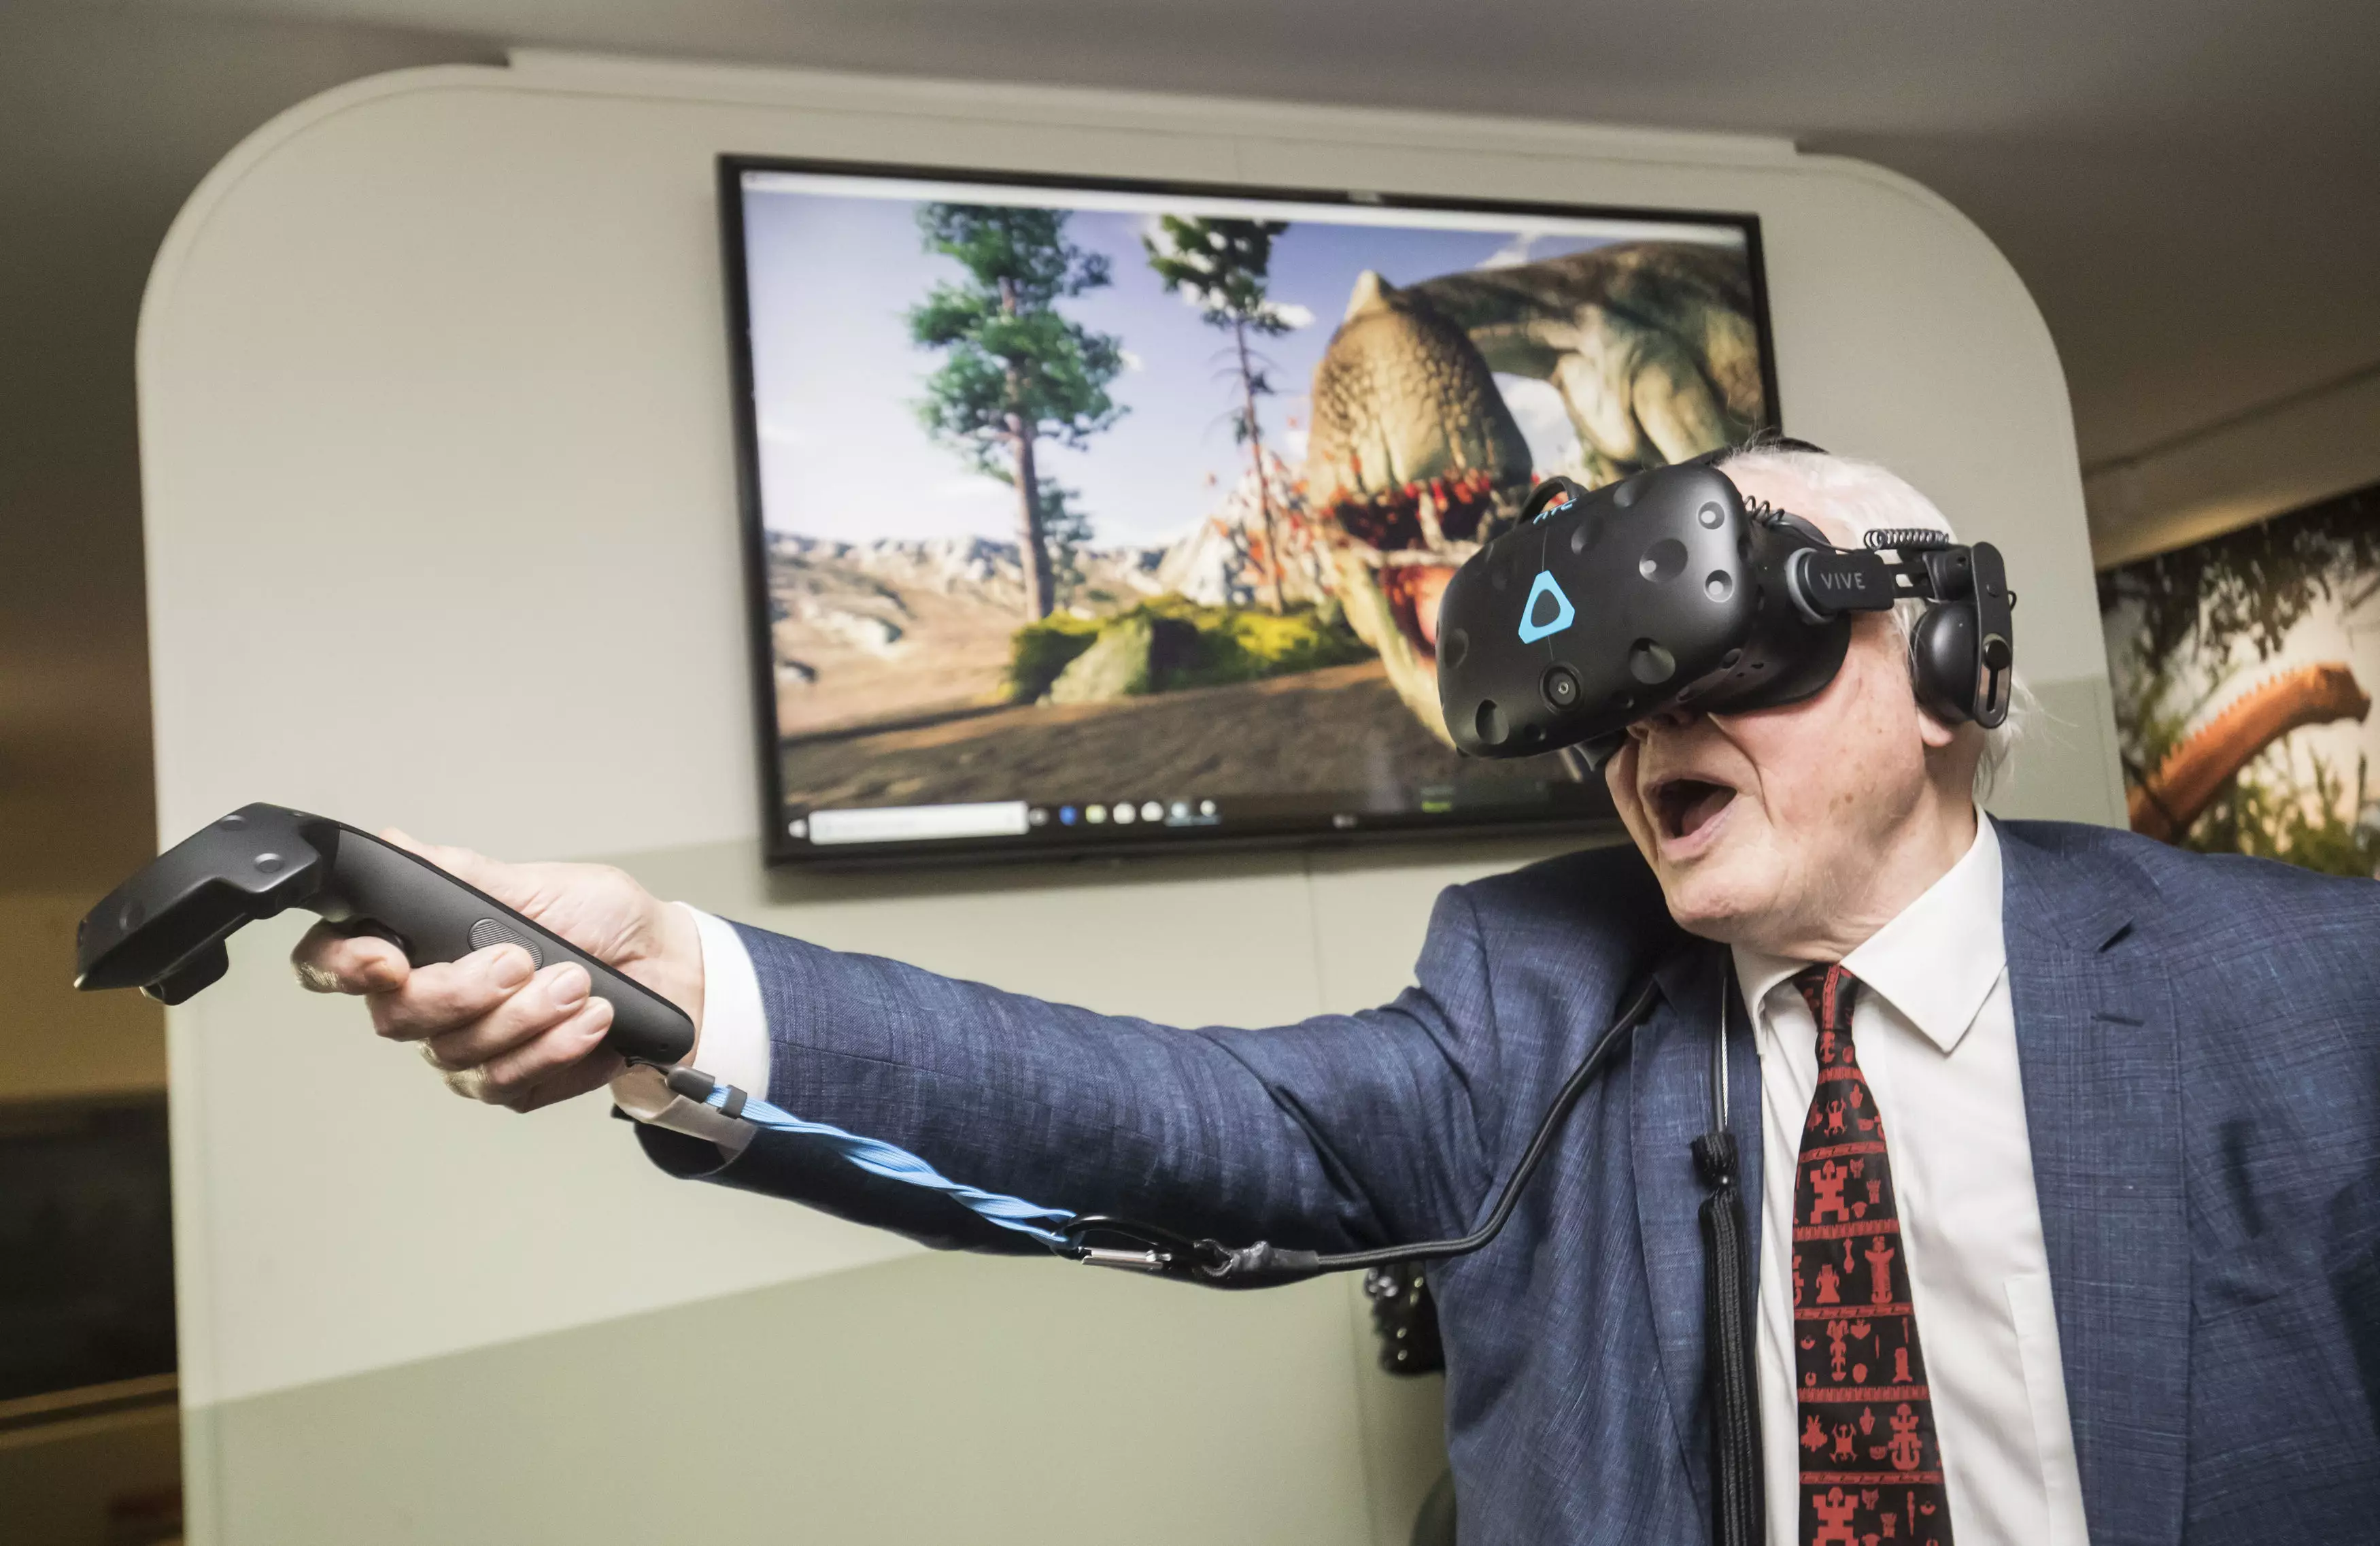 Look at him having an absolute ball with VR.